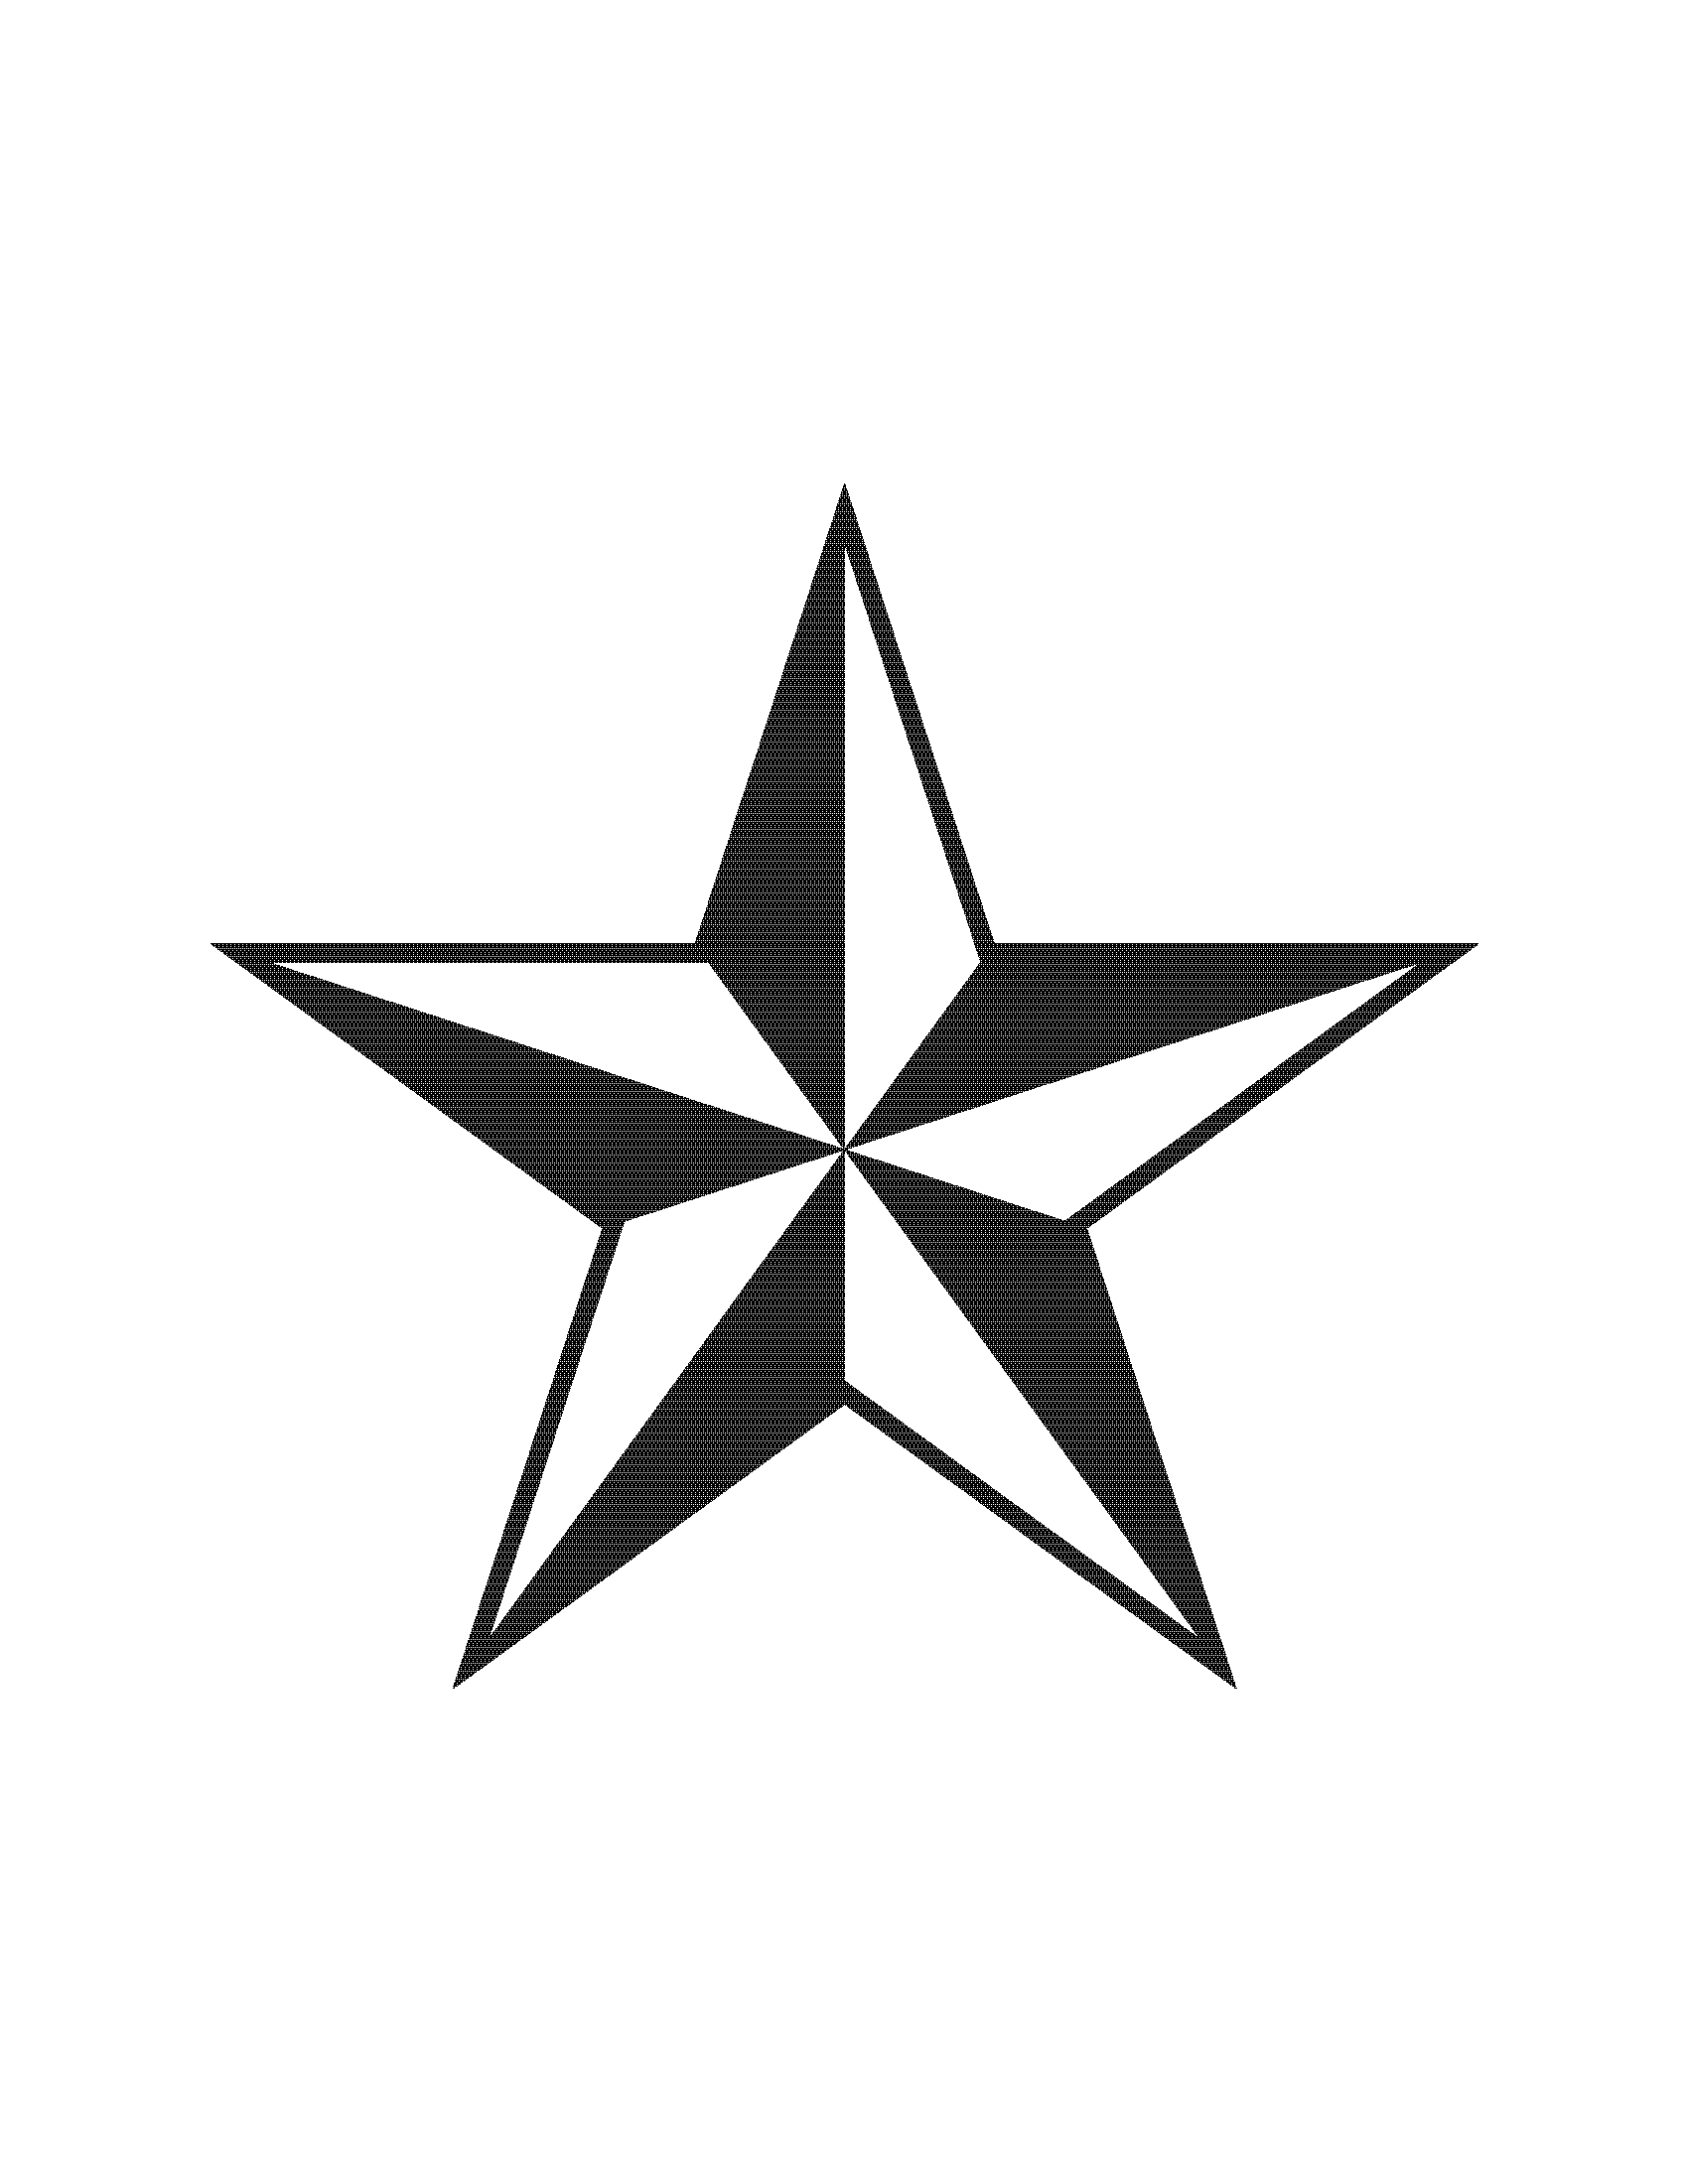 Star  black and white country western star clipart